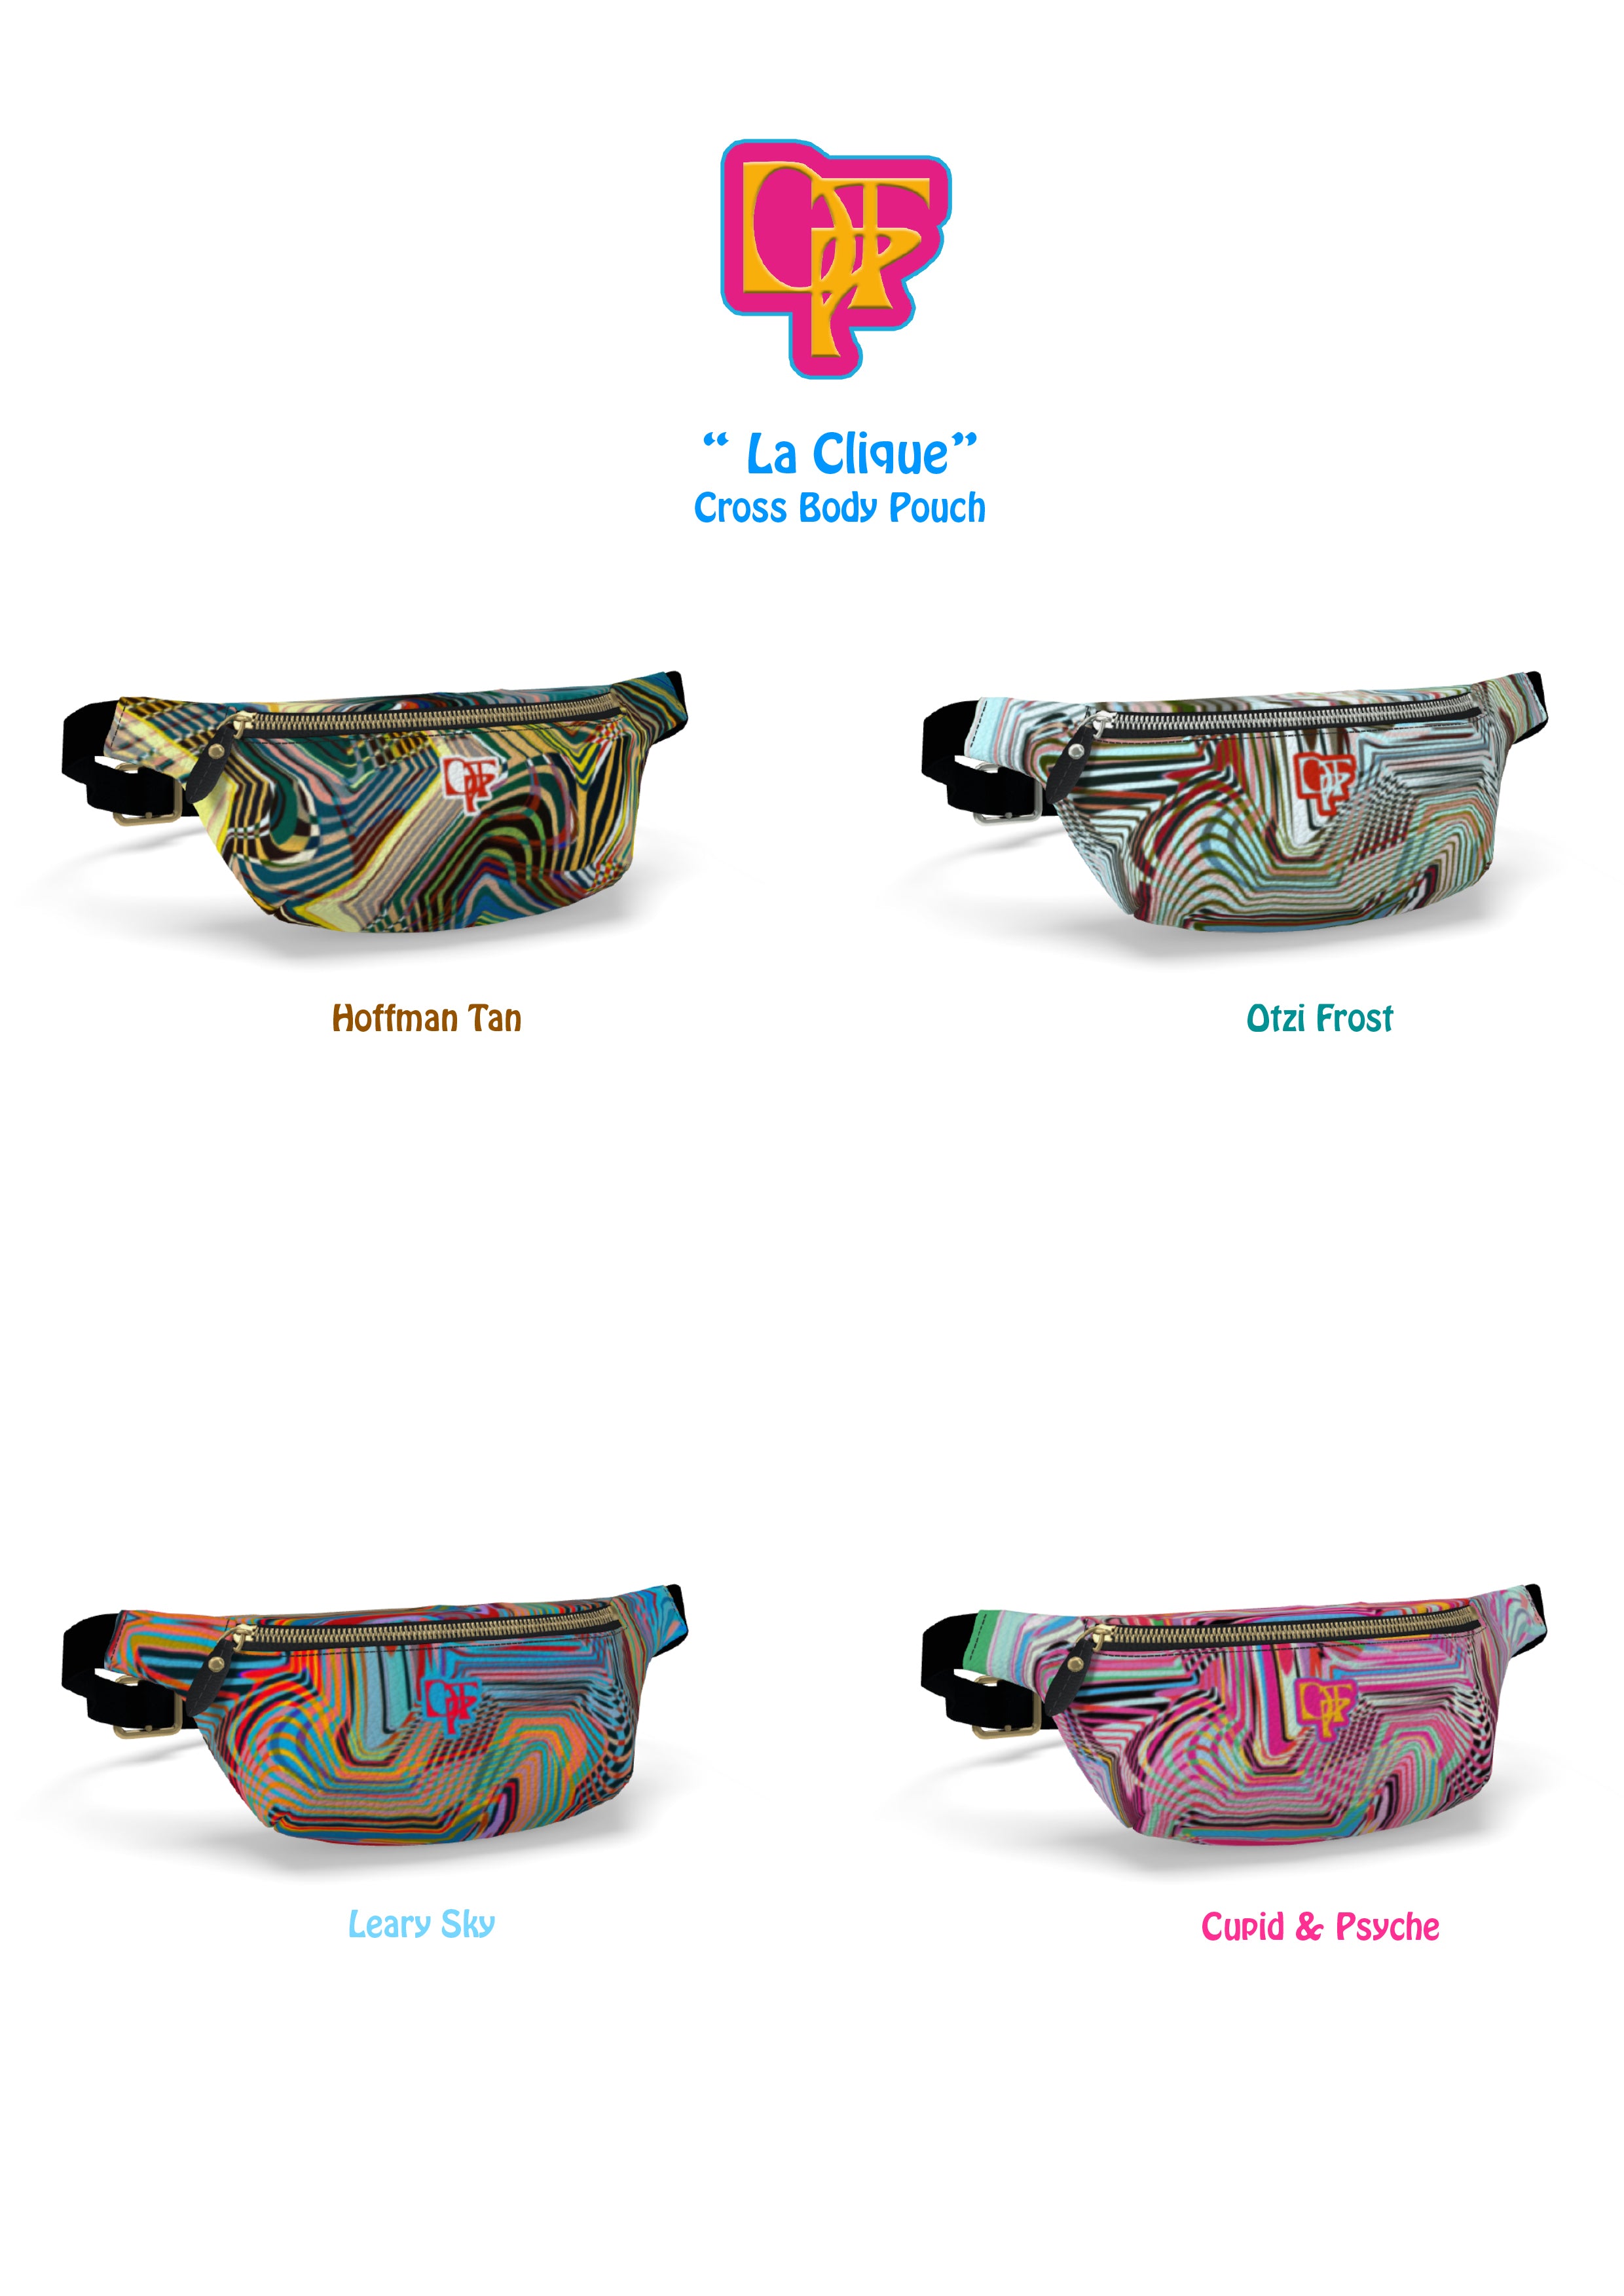 Leather Crossbody Pouch from our “La Clique" collection In colourway Cupid & Psyche